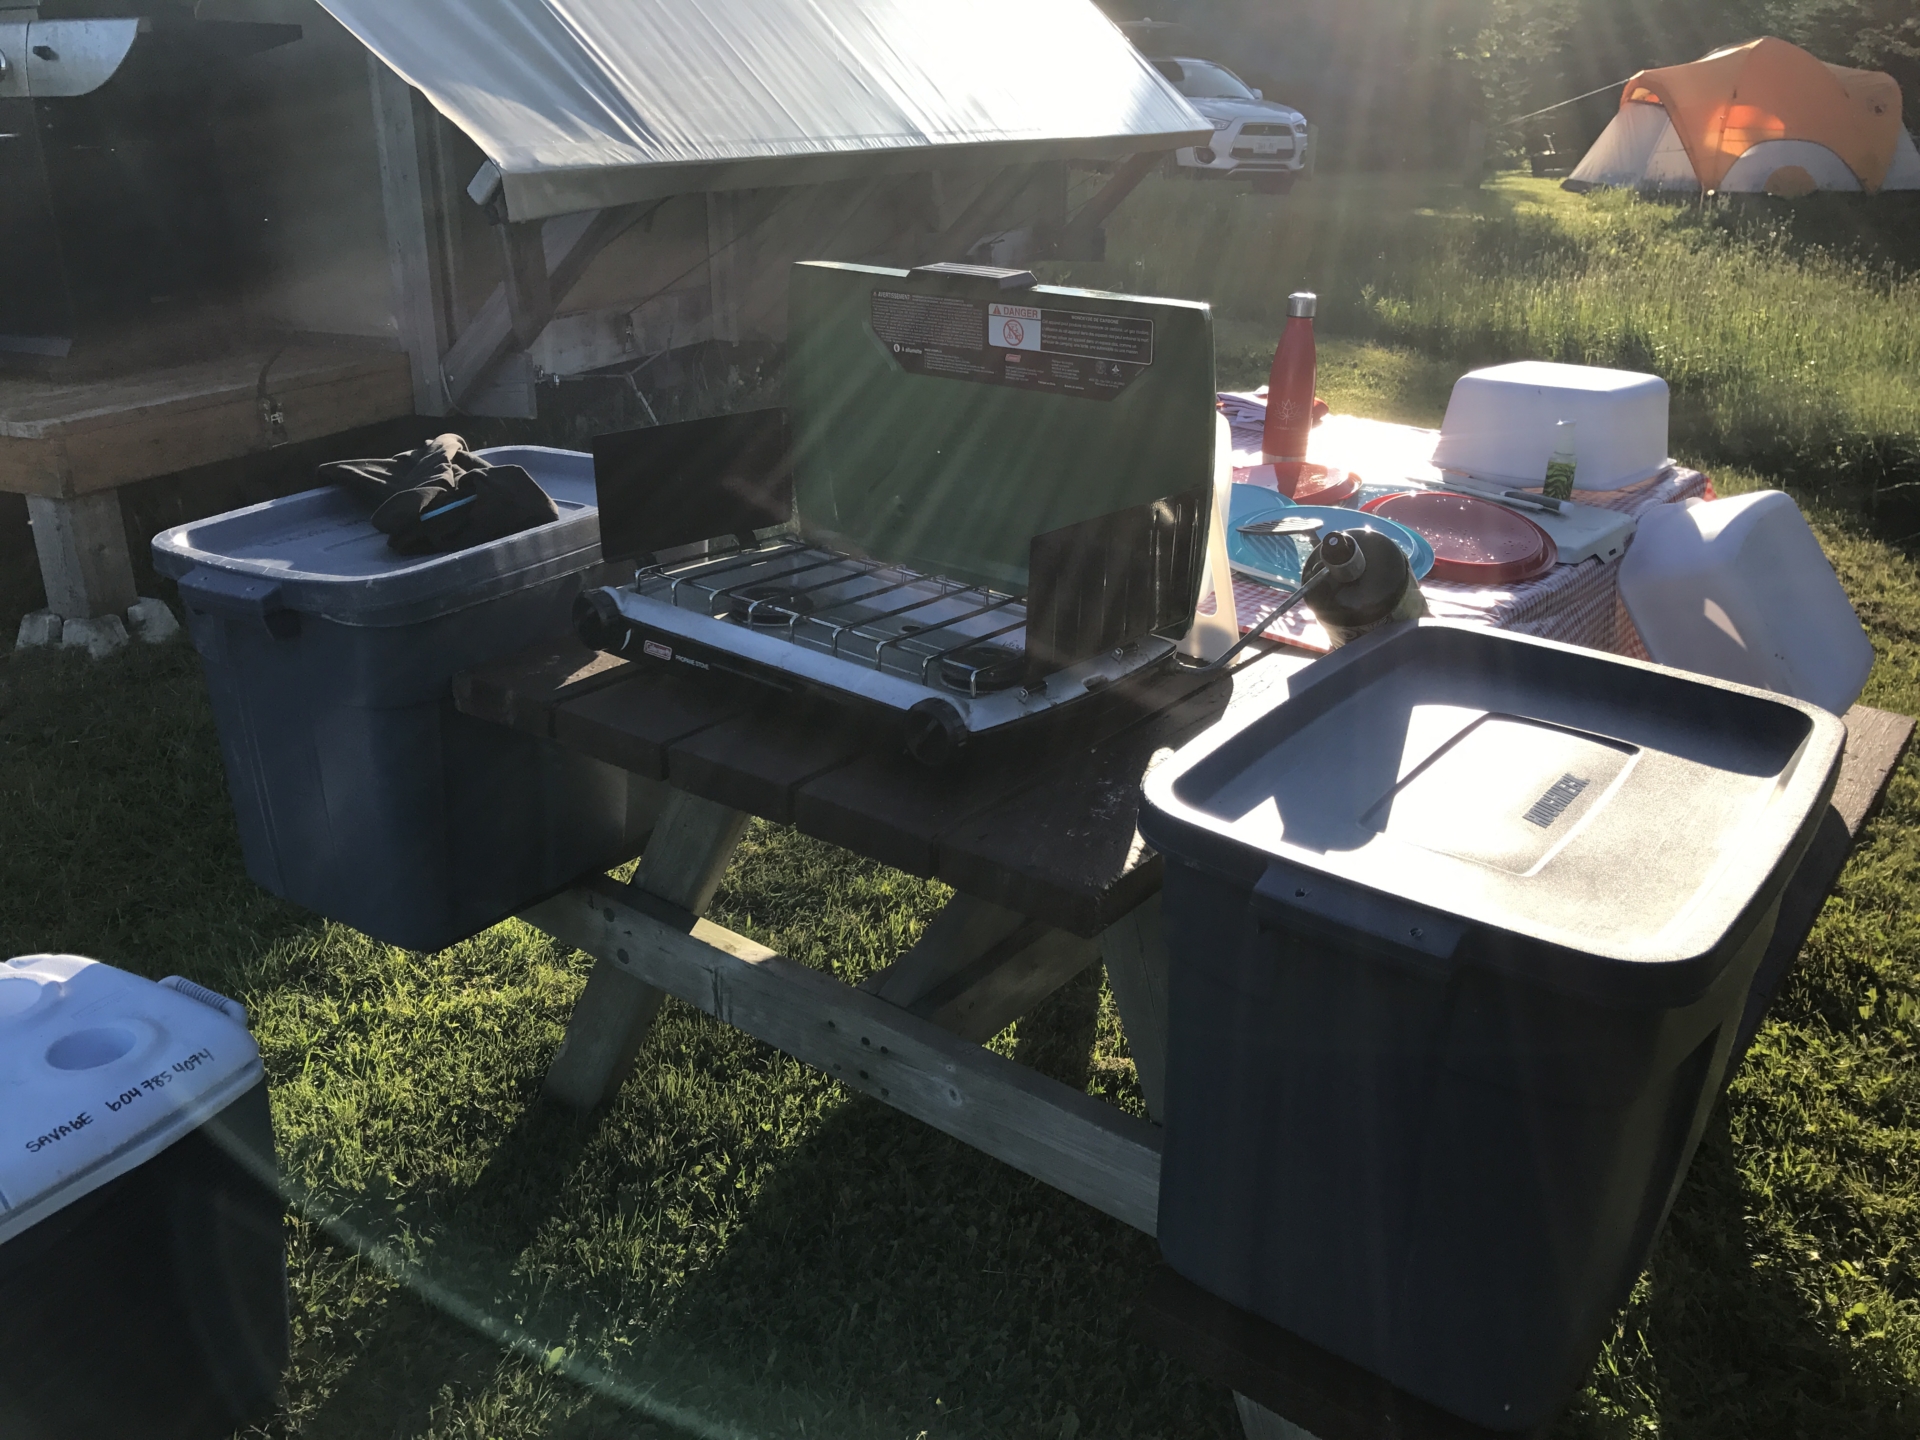 Campsite kitchen and how to keep a bare campsite